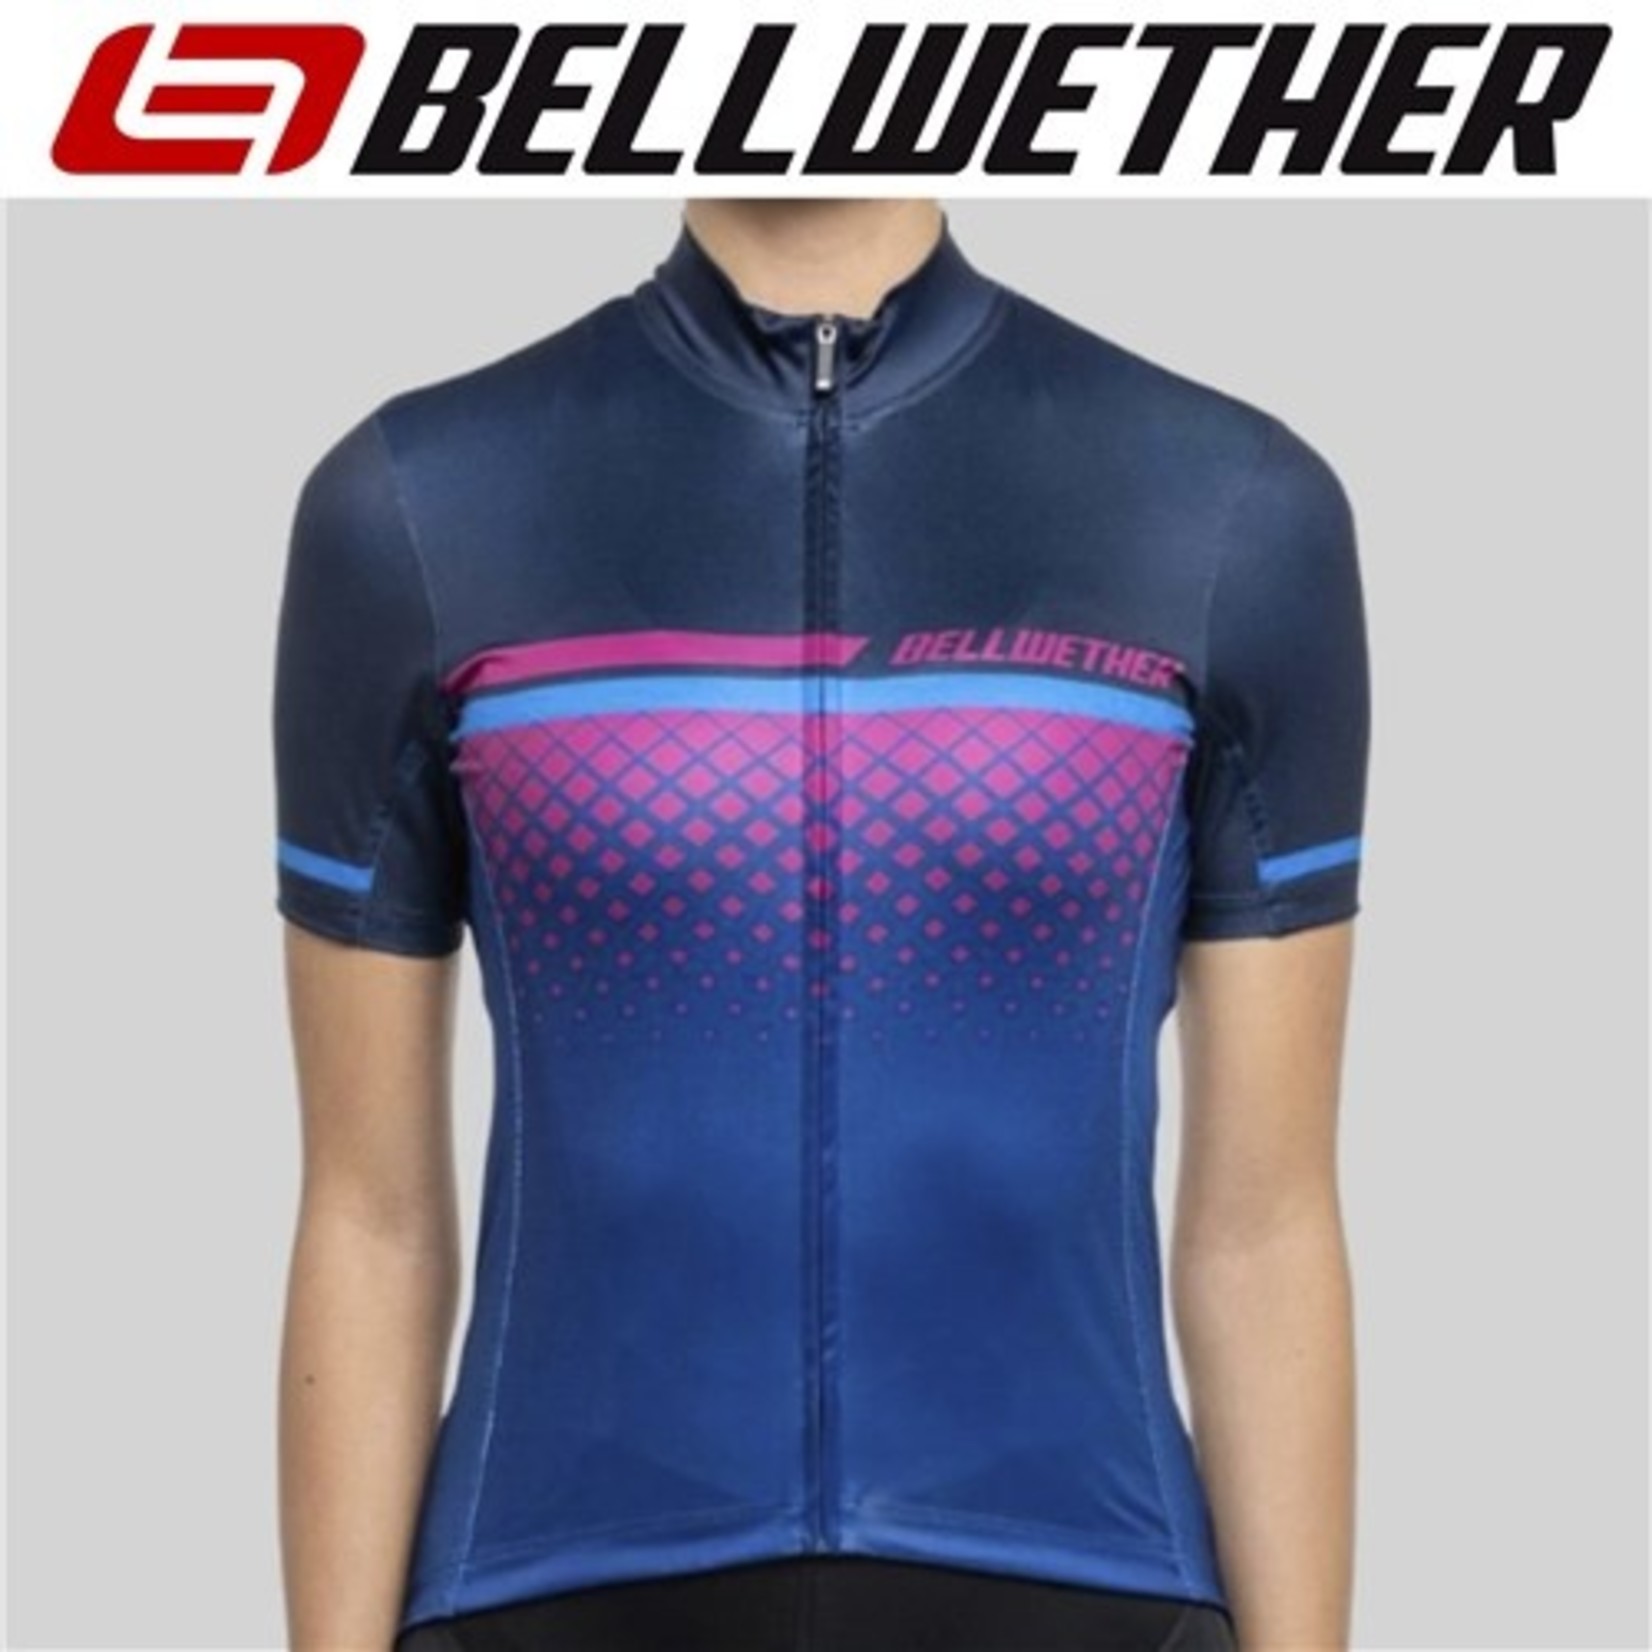 Bellwether Bellwether Cycling Jersey - Gradient Jersey Women's - Navy